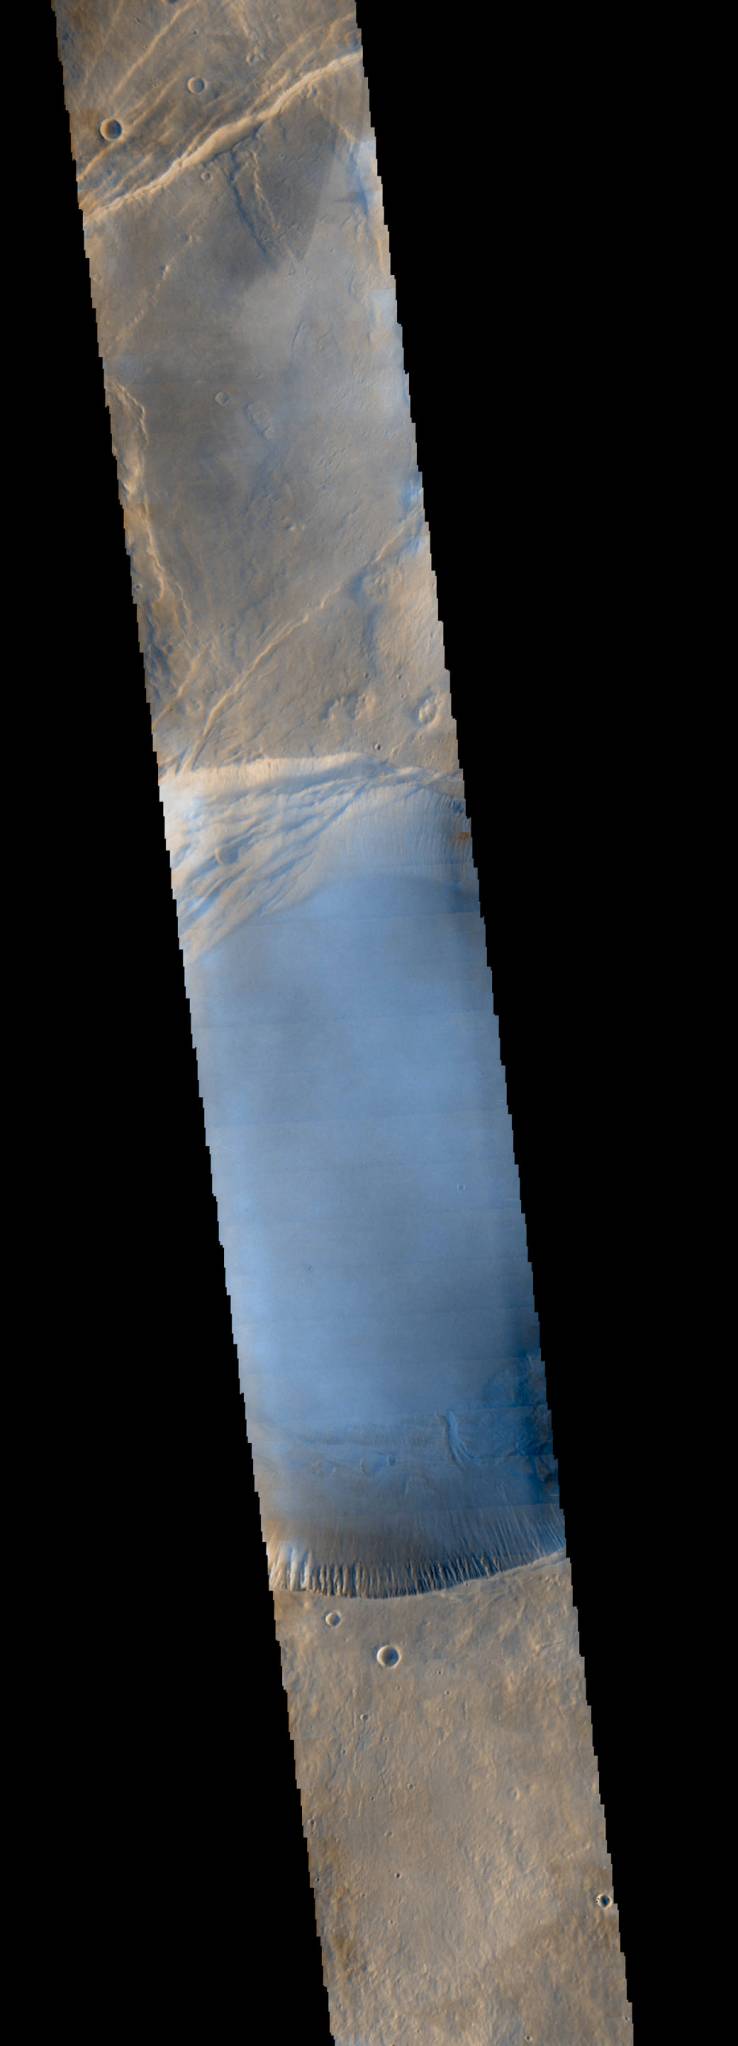 Seen shortly after local Martian sunrise, clouds gather in the summit pit, or caldera